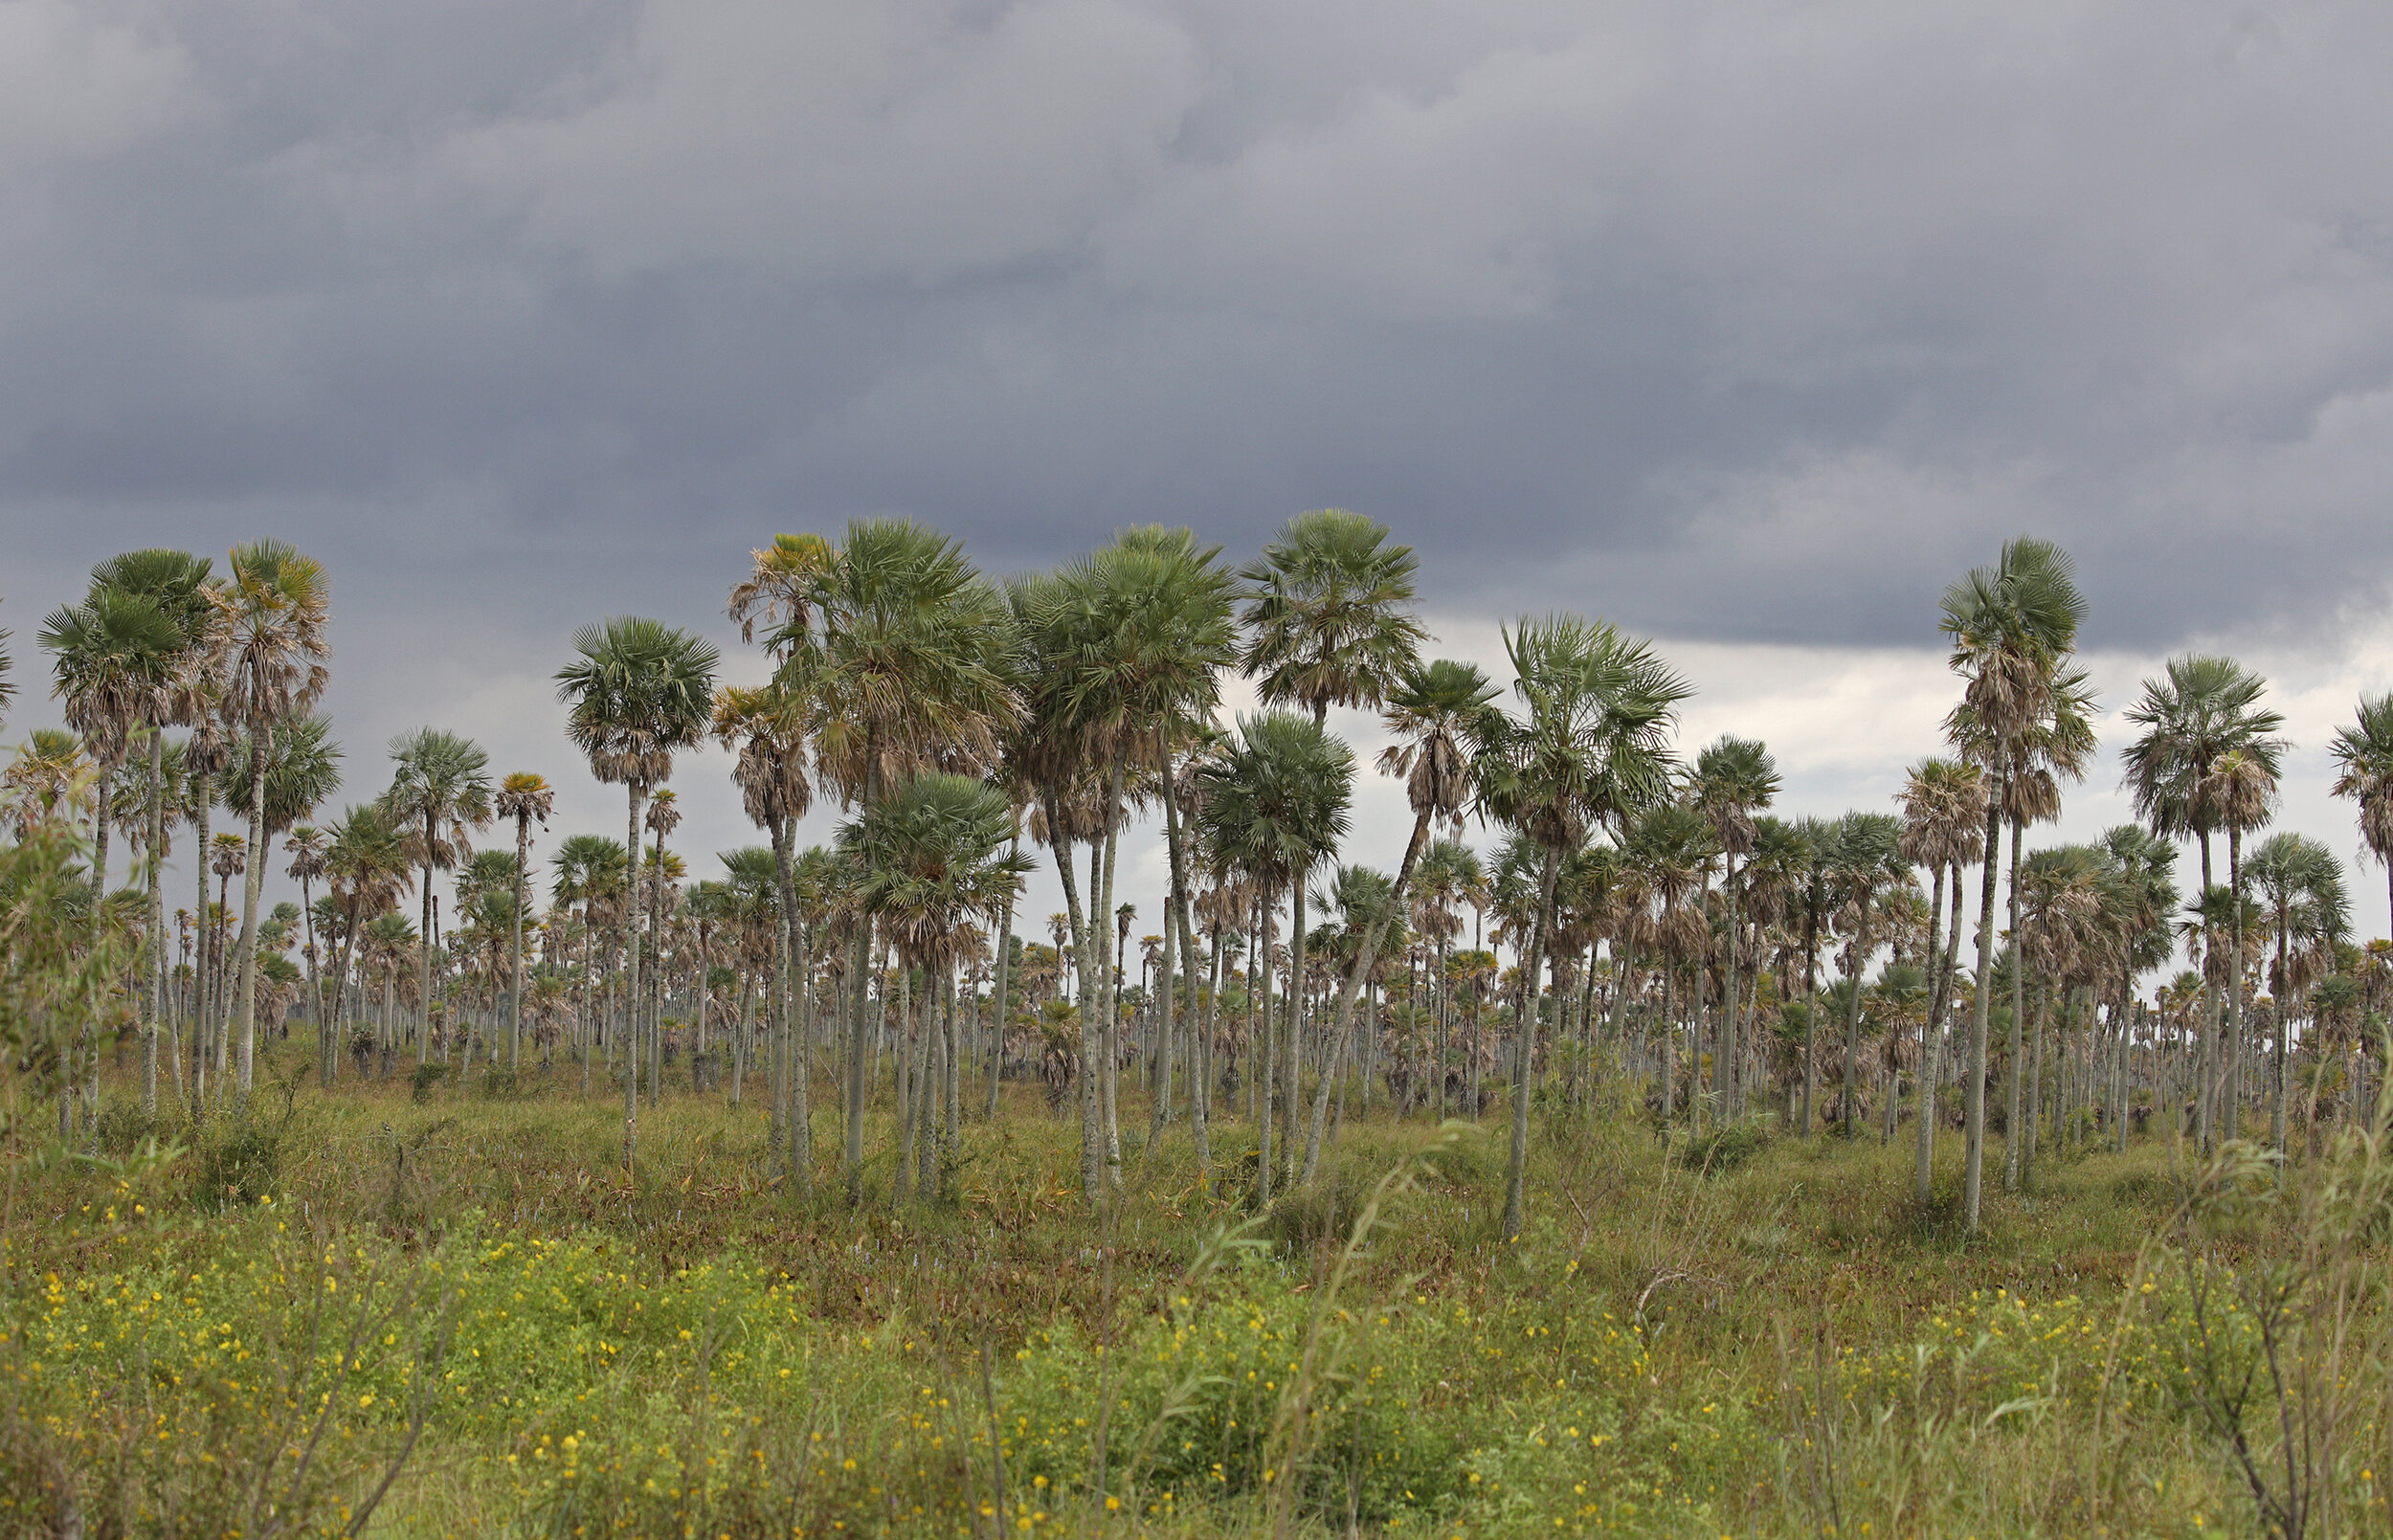  A stand of Caranday Palms in the Wet Chaco of Paraguay. 